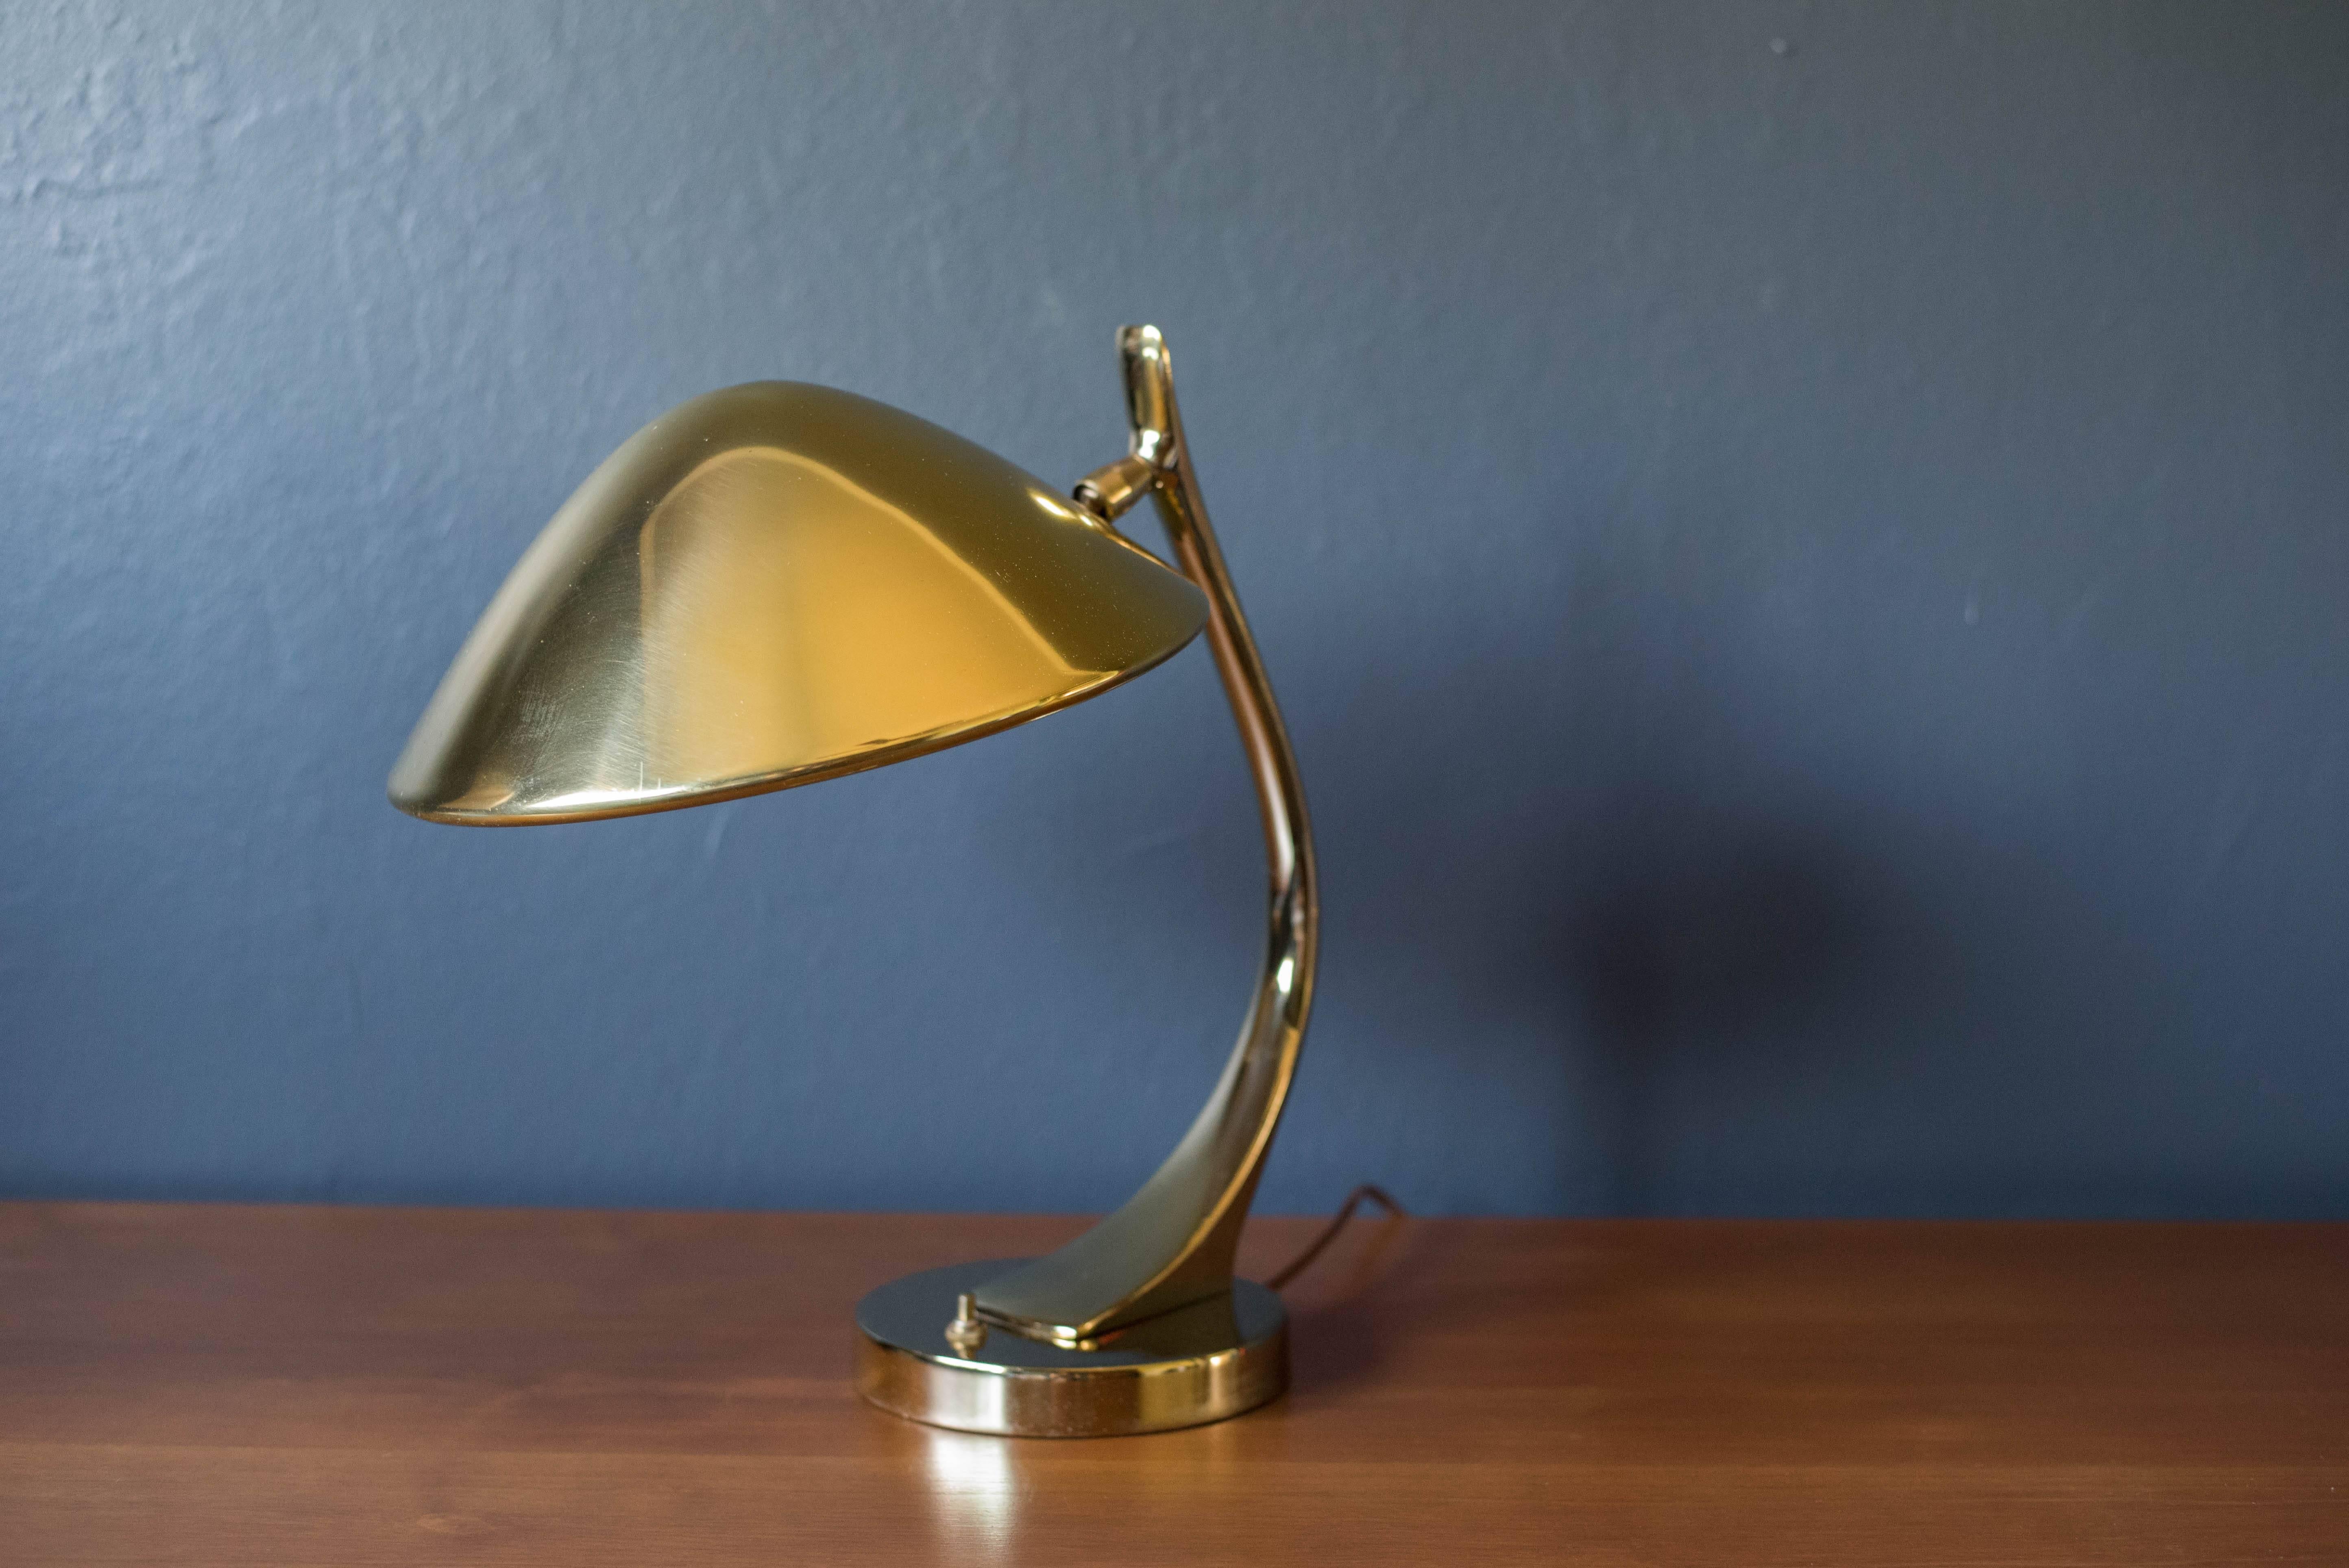 Mid-Century adjustable desk or table lamp by Laurel Lamp Co., circa 1970s. This piece is brass-plated and functions with an adjustable neck and tilting head.